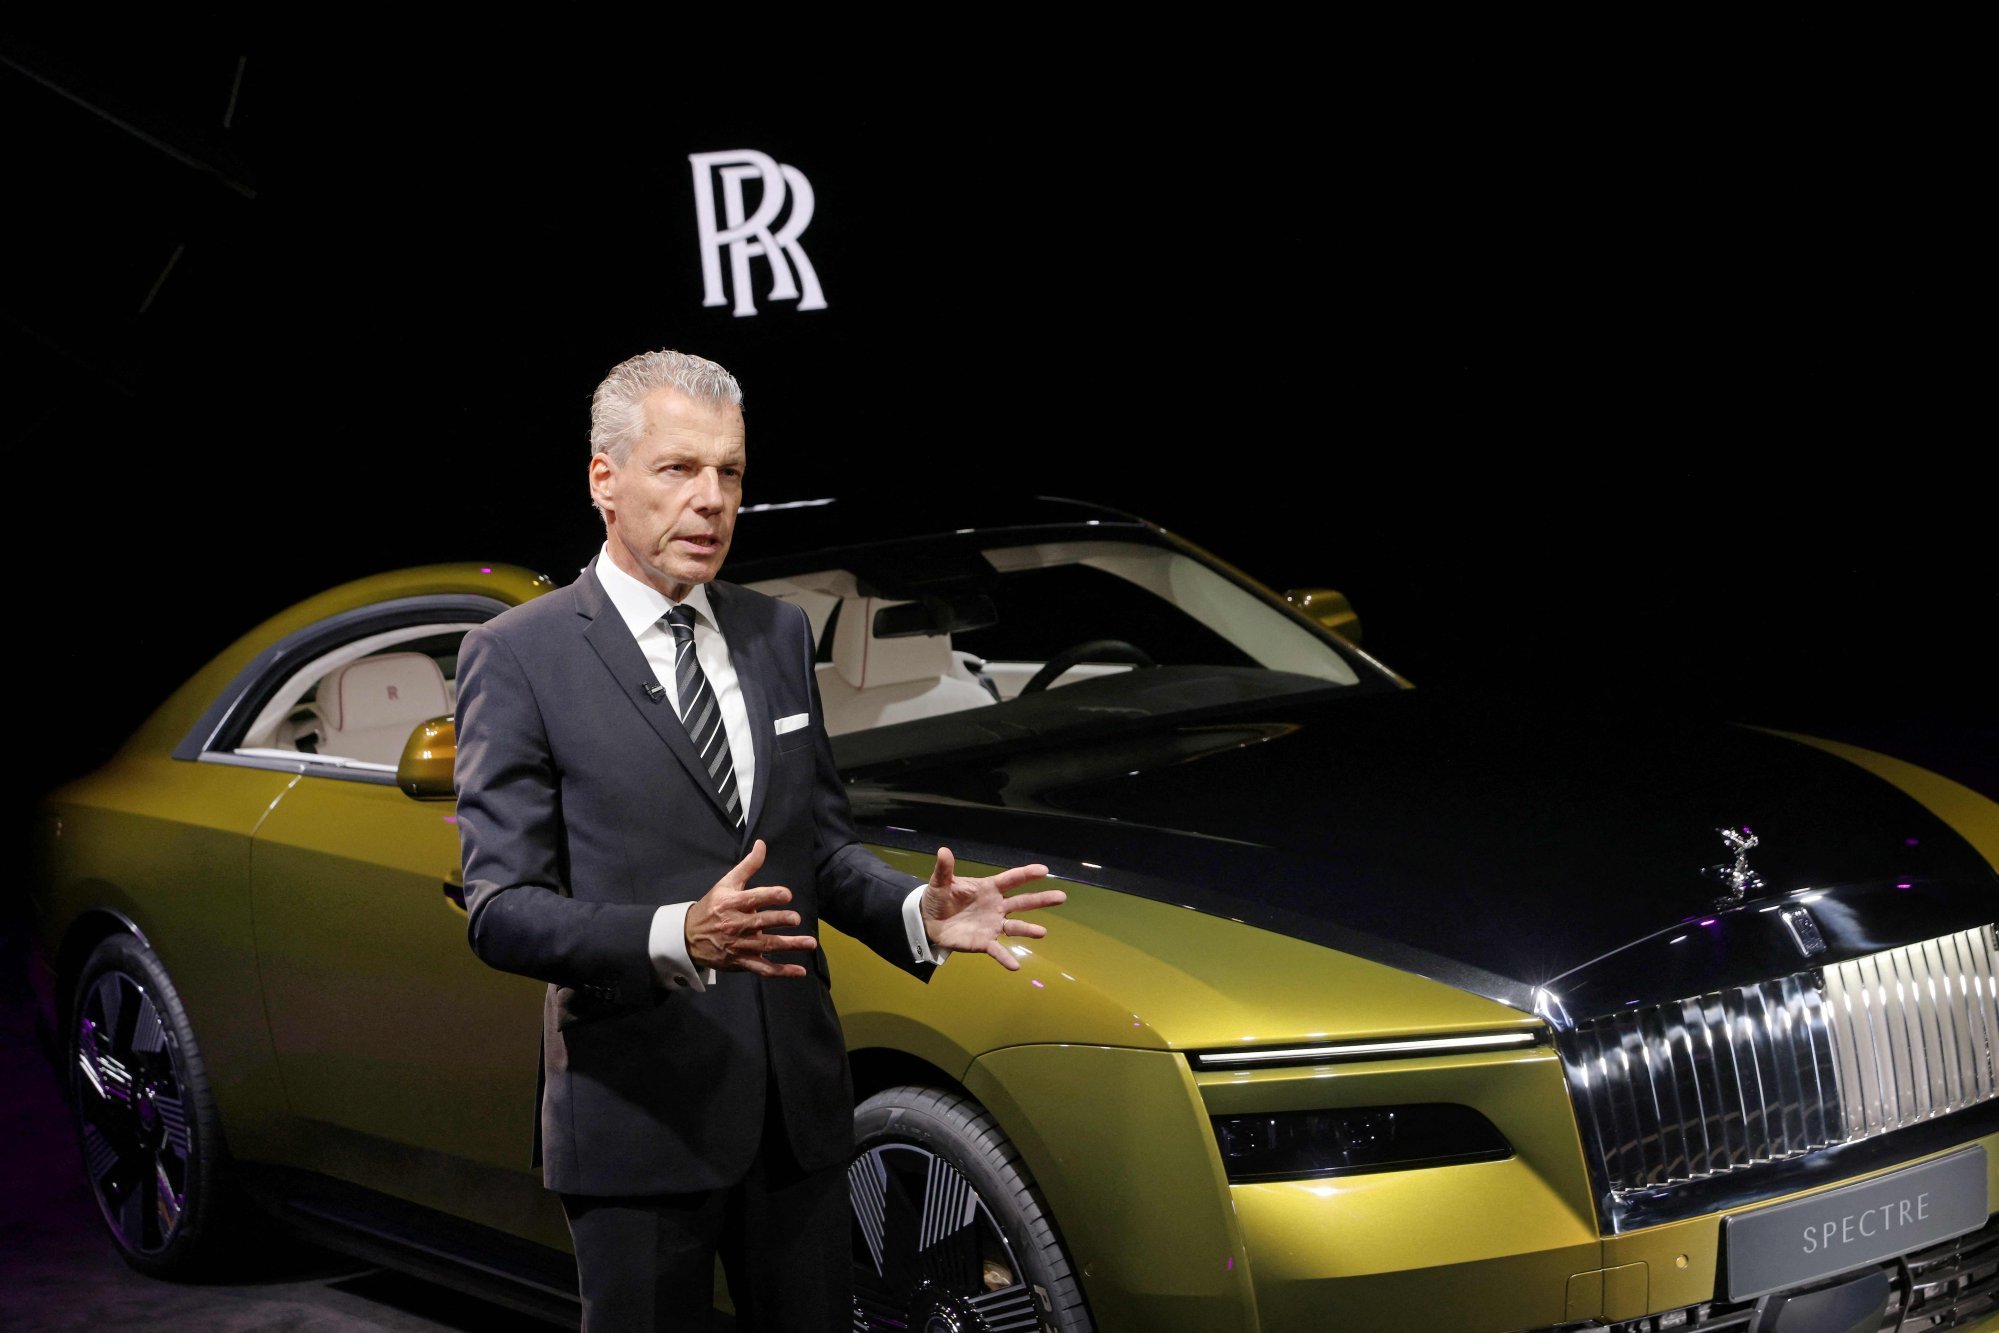 RollsRoyce plans to launch electric car this decade  Automotive News  Europe